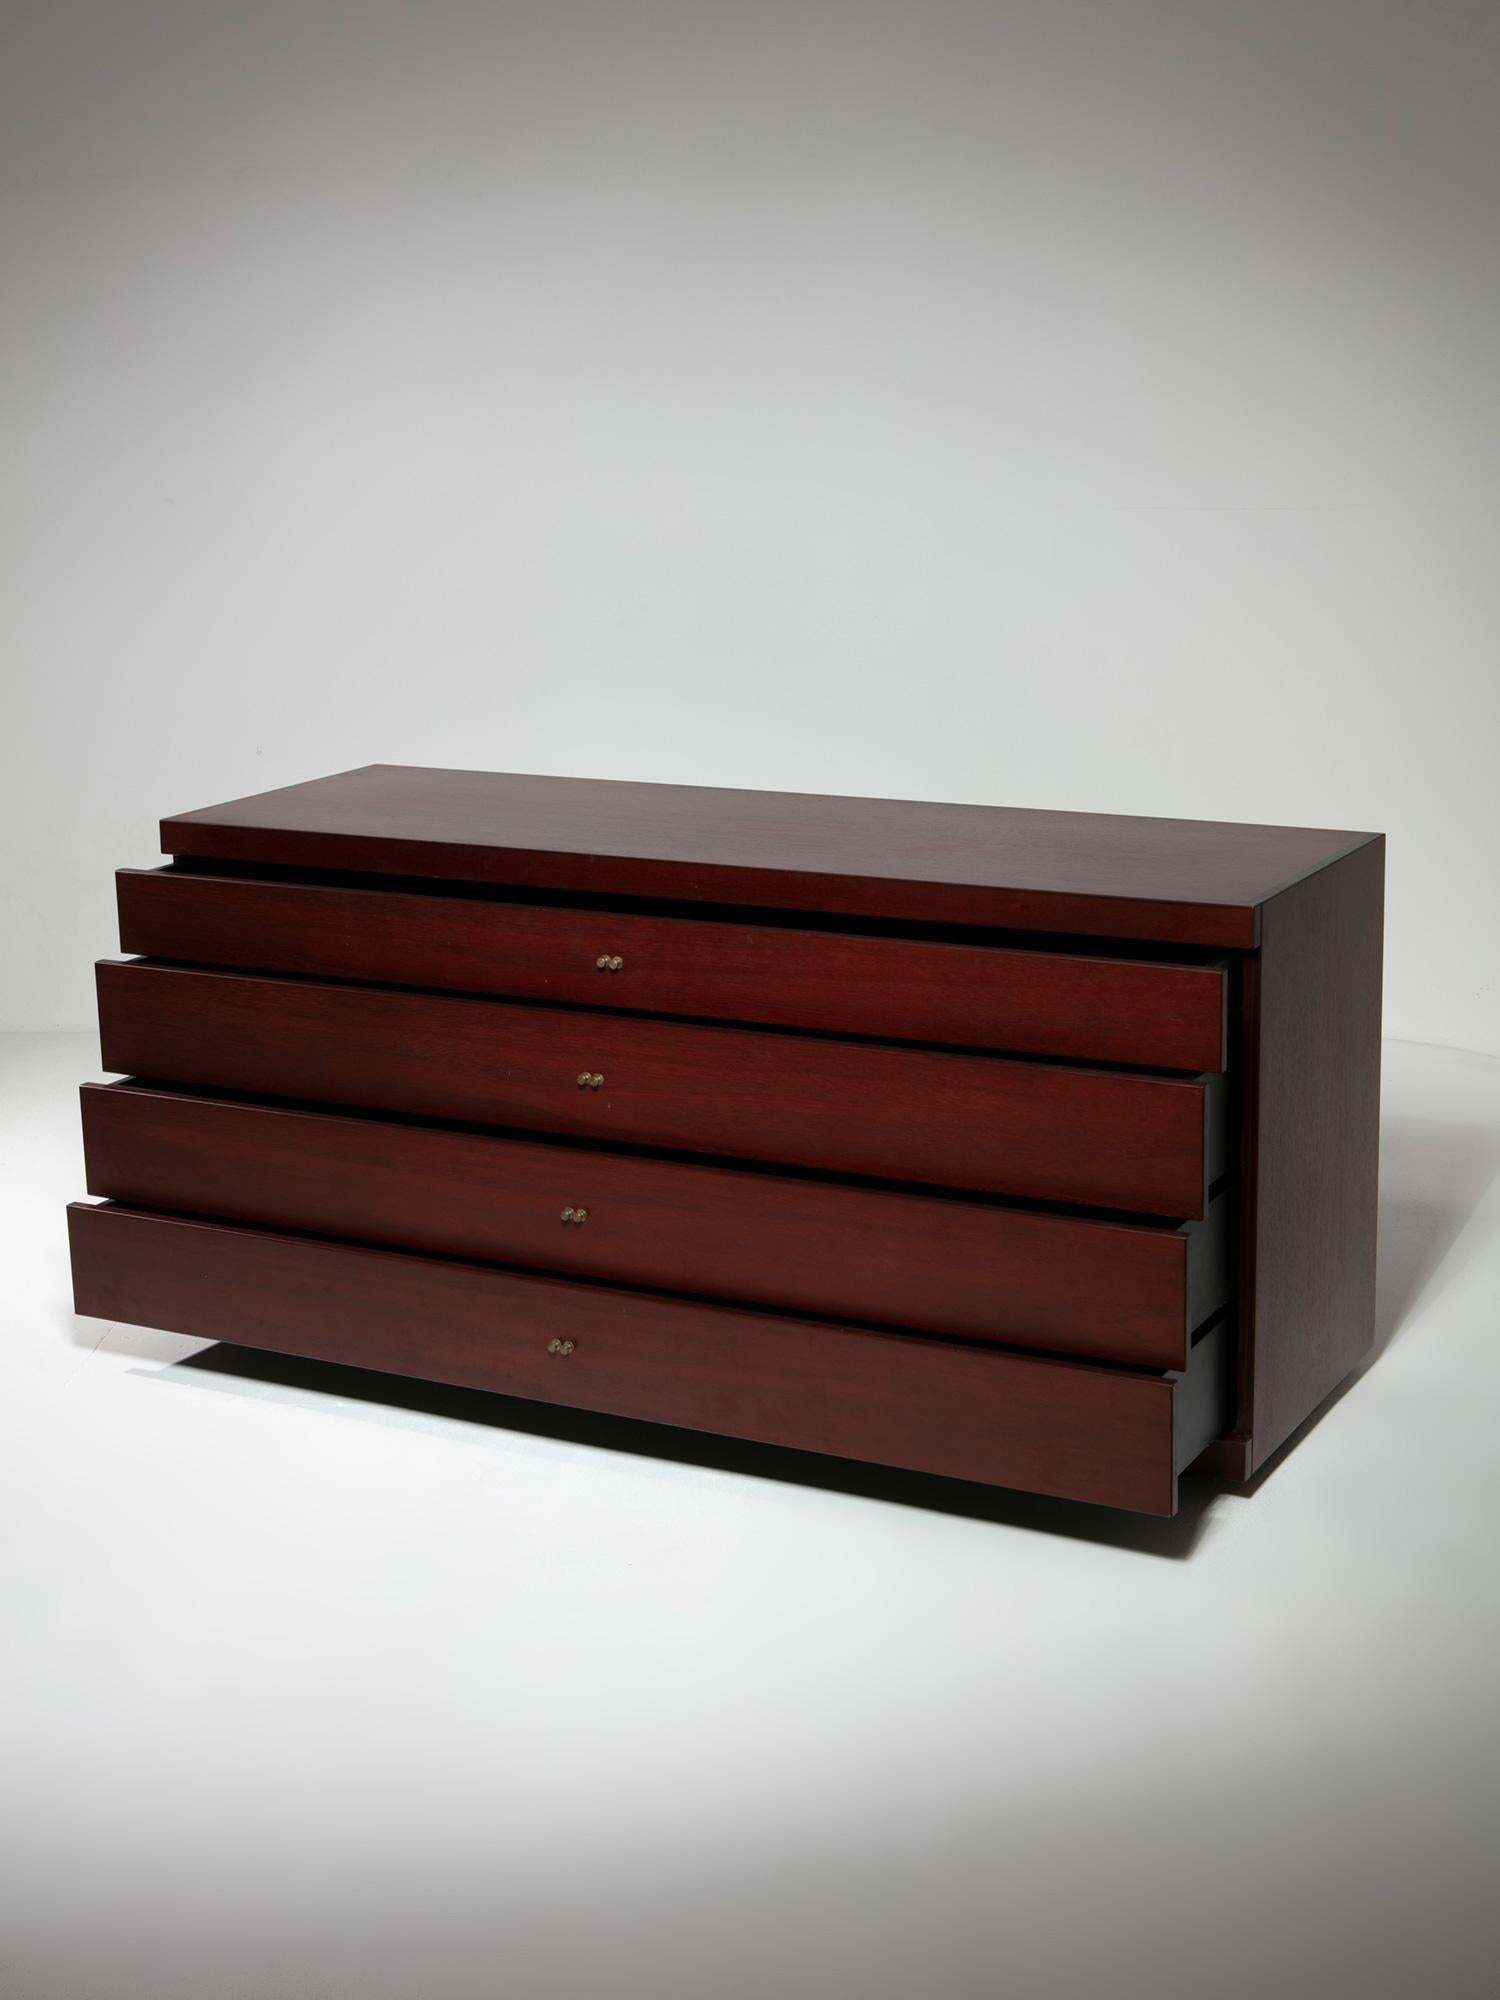 Capable MB84 Wood Chest of Drawers by Roberto Poggi for Poggi, Italy, 1990s For Sale 2